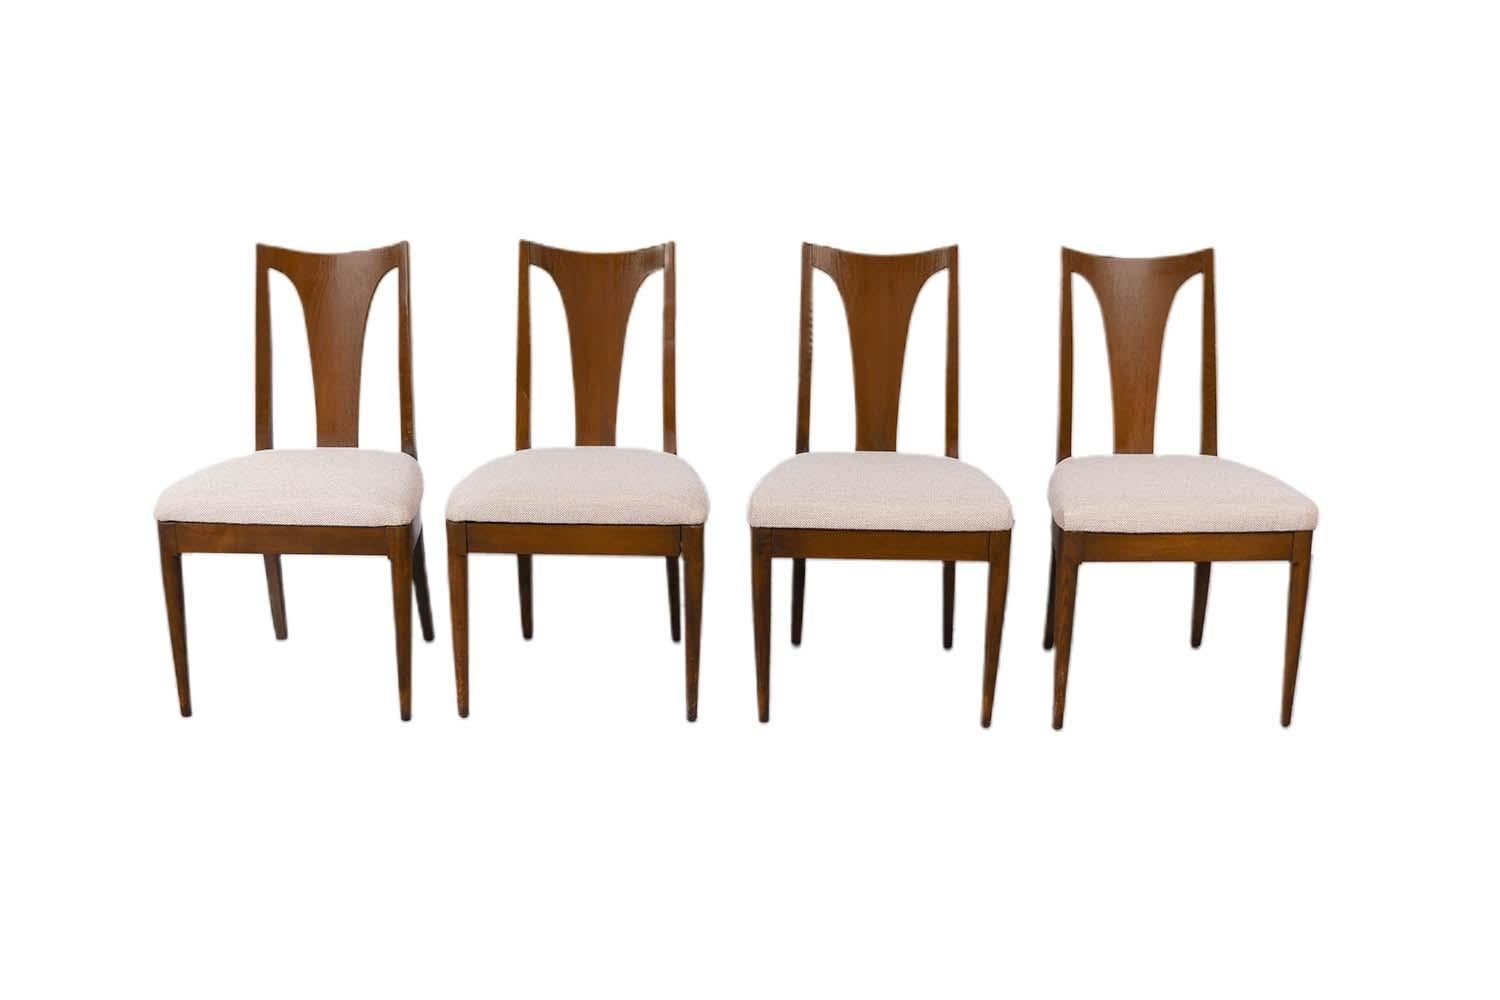 Set of four stunning Mid Century Modern Walnut dining chairs from Broyhill Brasilia II collection. Features four side chairs in Newly Reupholstered High density foam dacron upholstery batting and 100% polyester tweed fabric seats. The arm chairs are